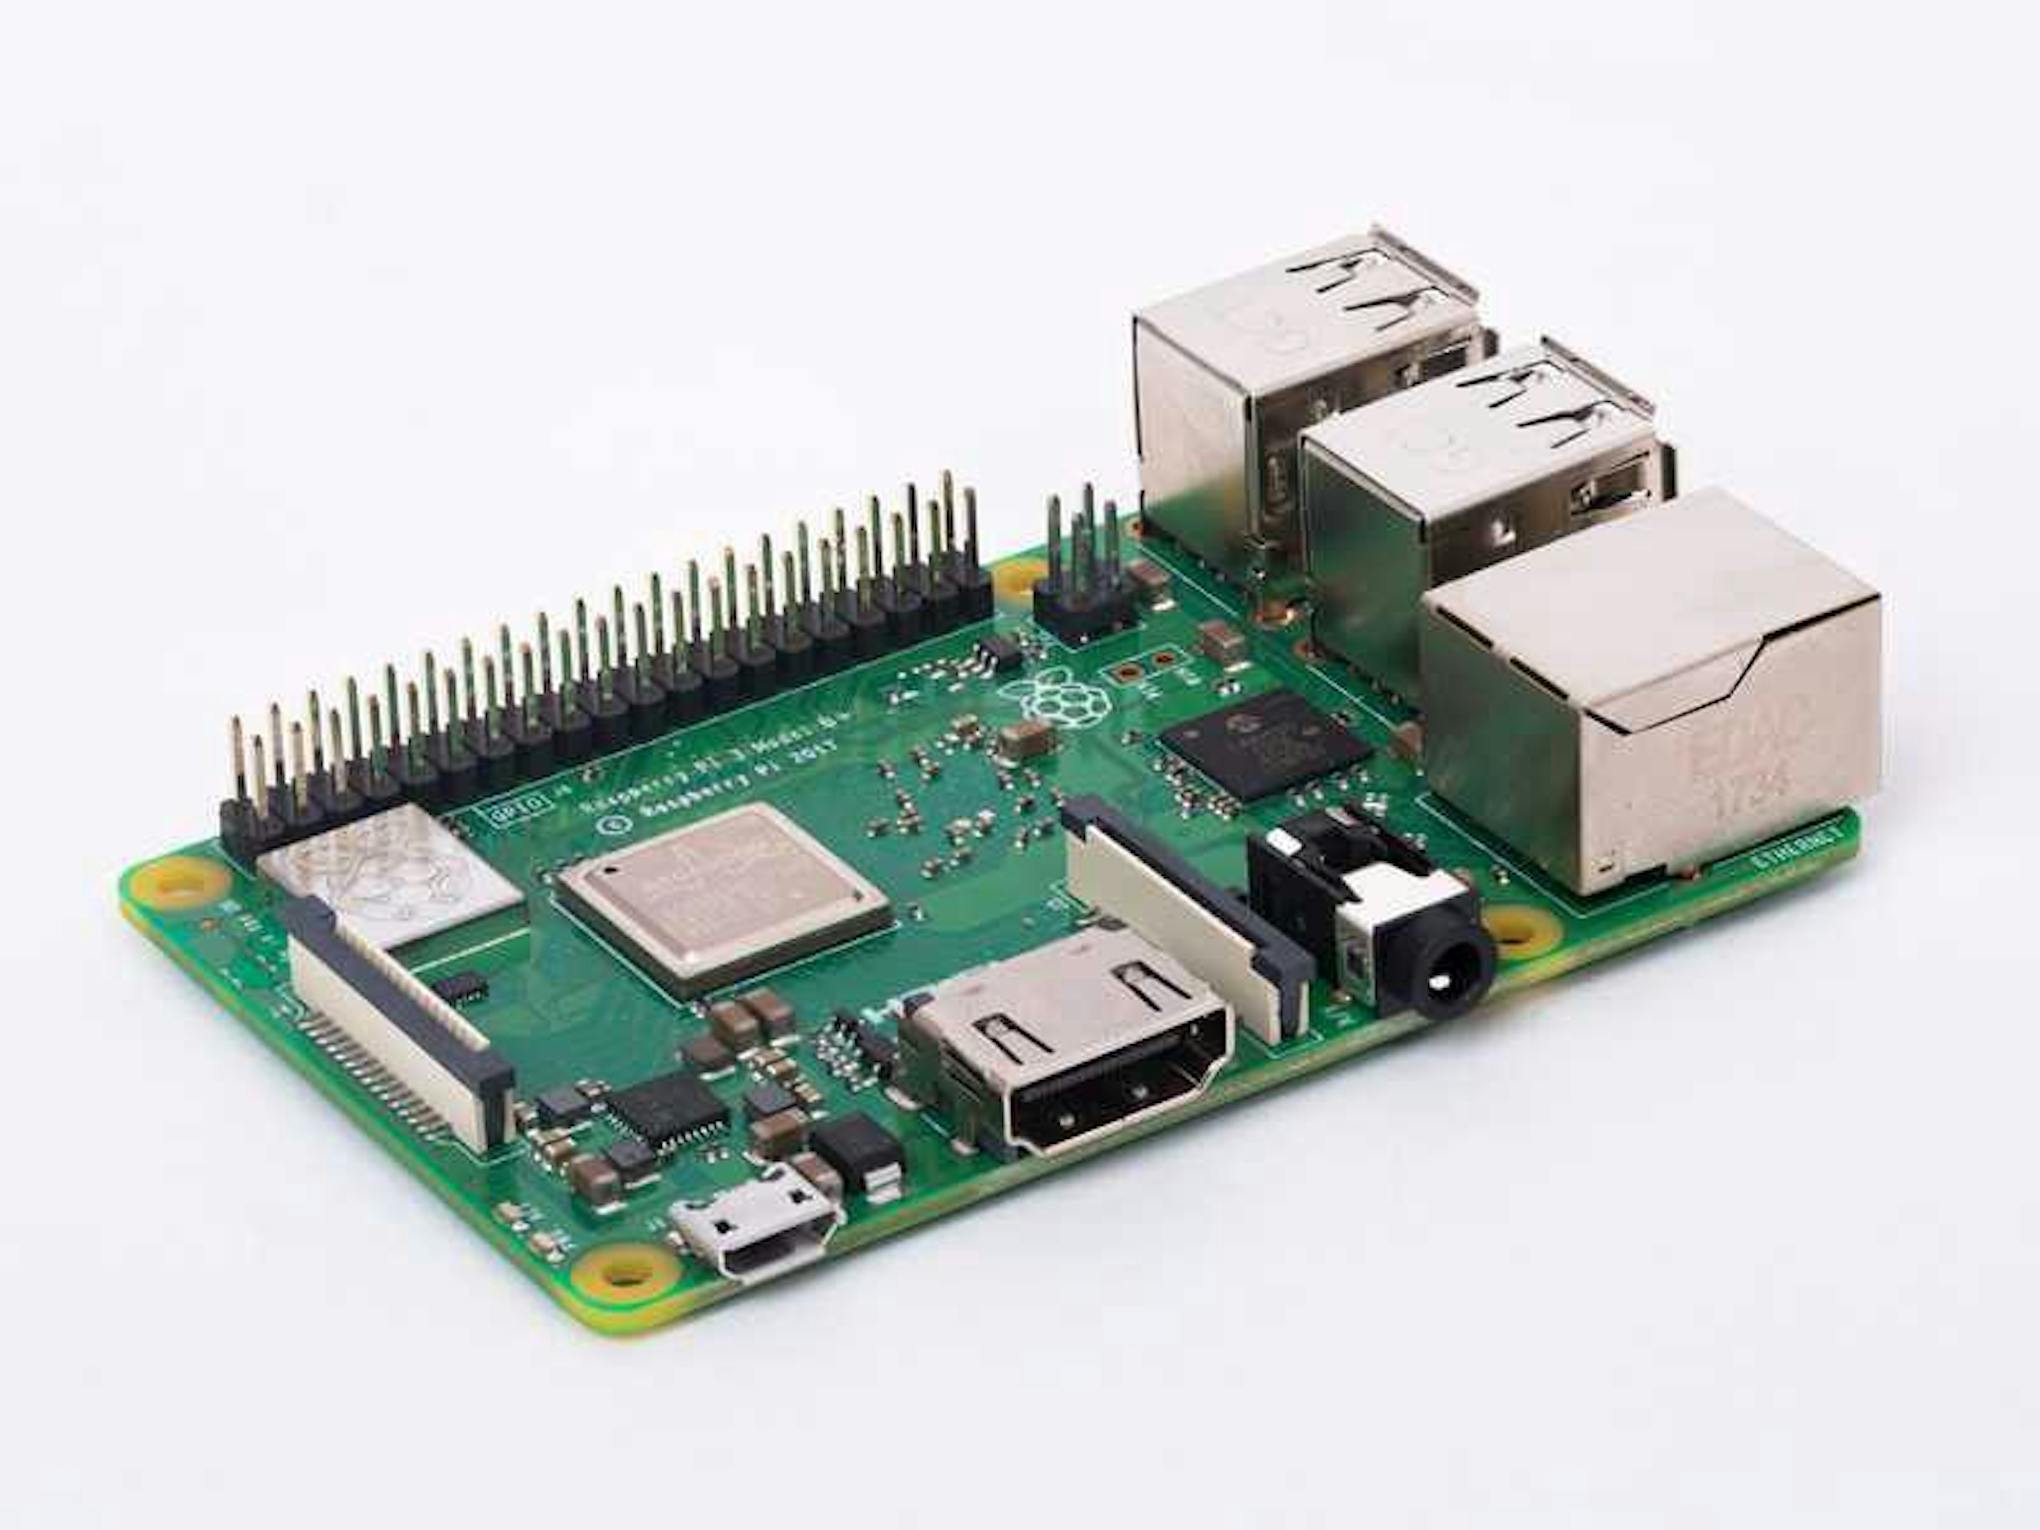 Making a Tiny Mac From a Raspberry Pi Zero : 18 Steps (with